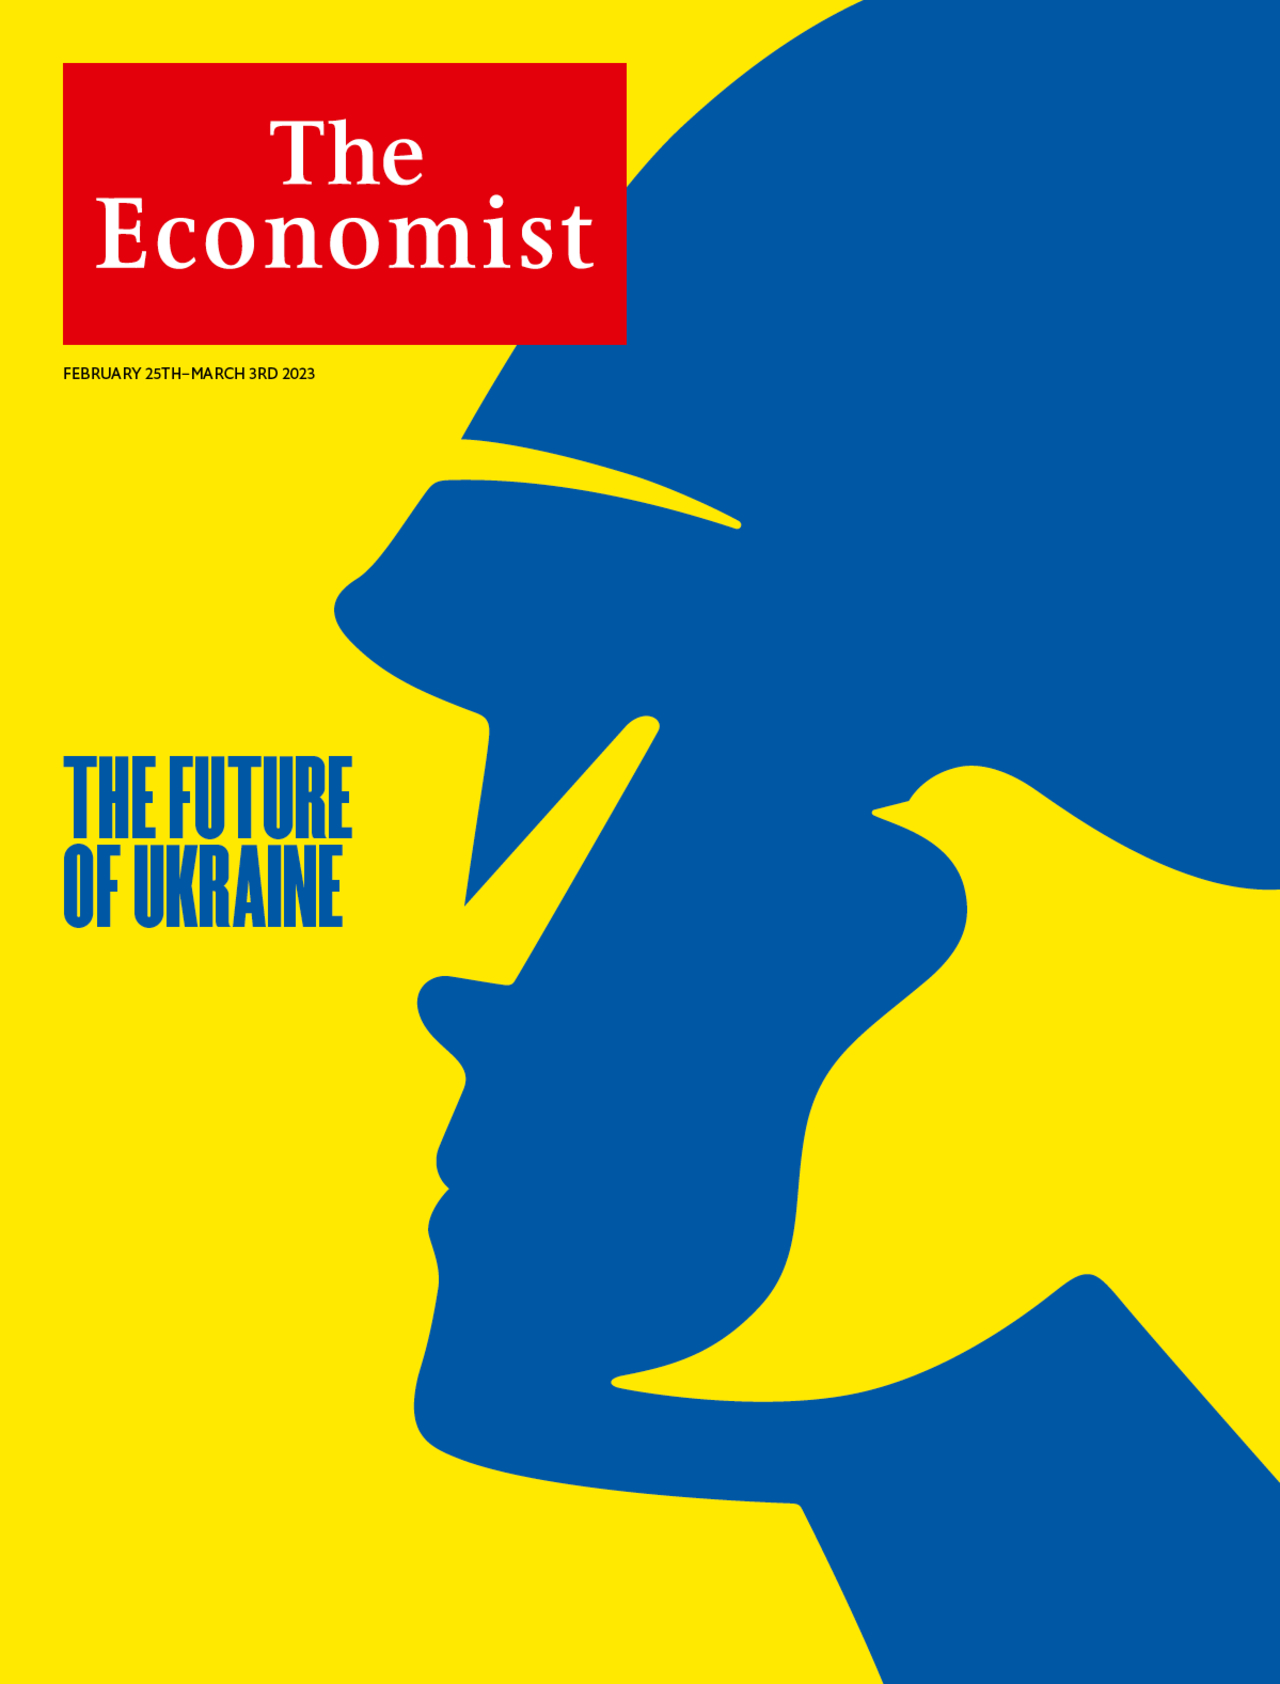 The Economist Feb 25th-March 3rd 2023 and latest editions.